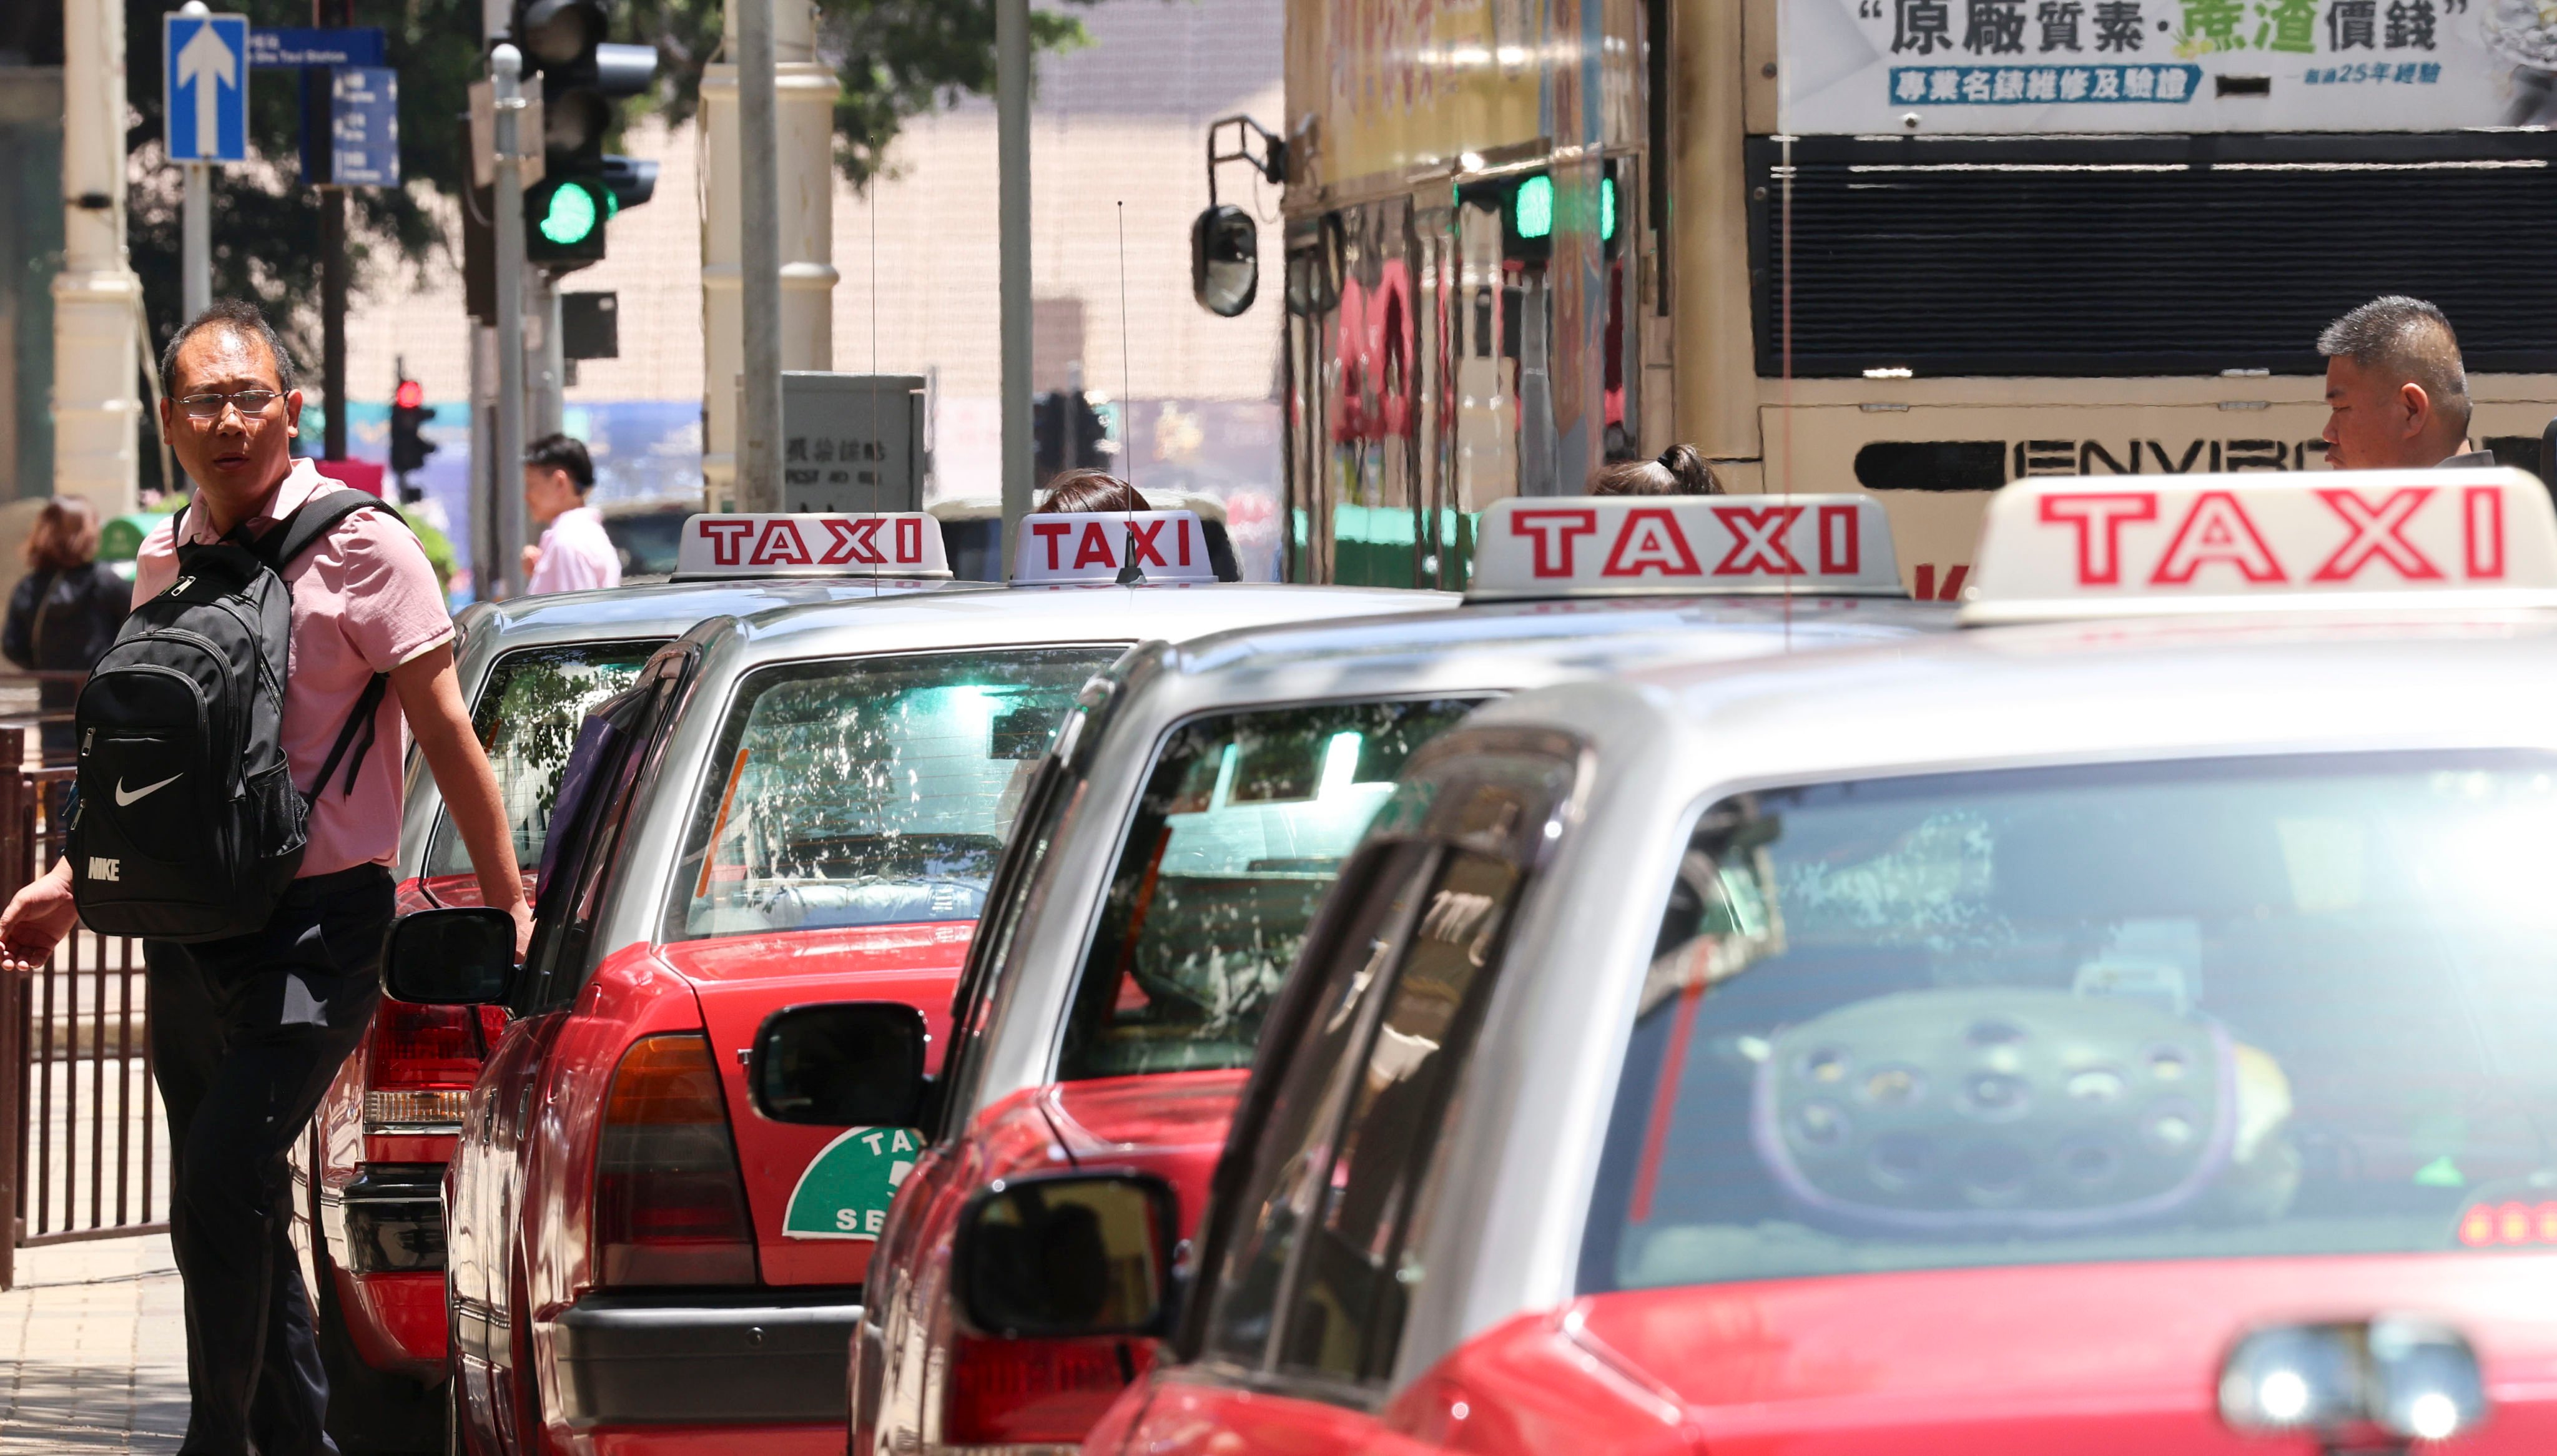 Some mainland Chinese tourists have complained about the quality of taxi service. Photo: Jelly Tse